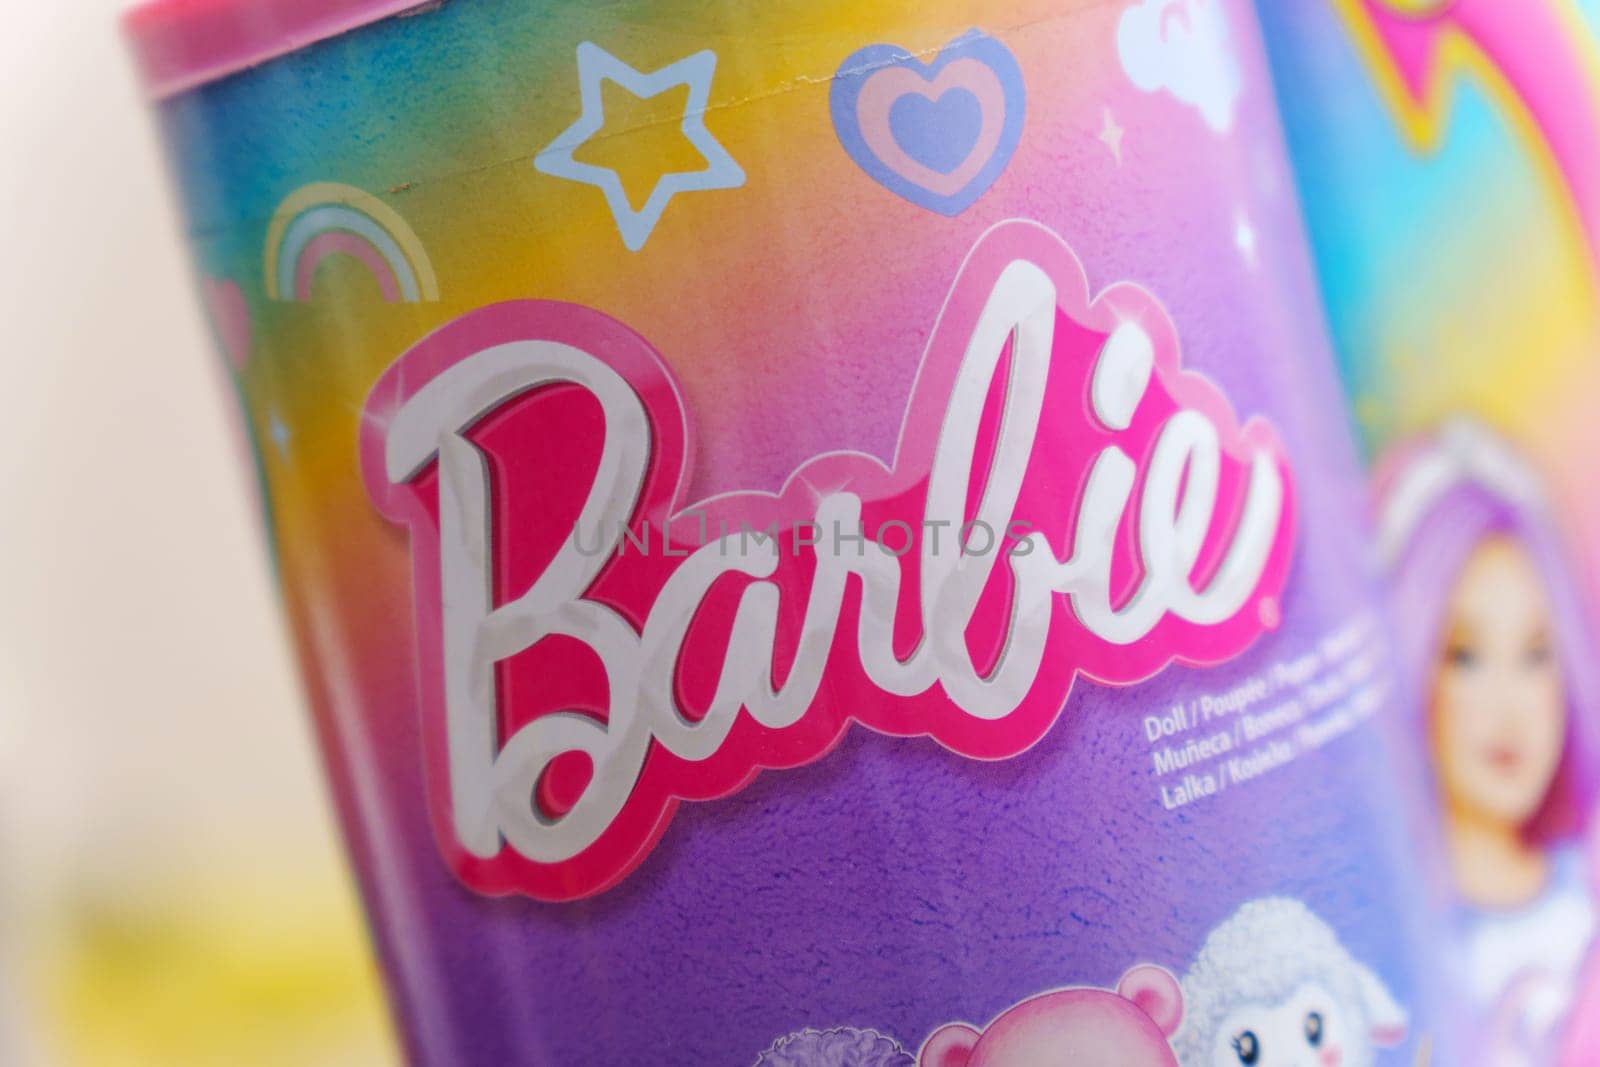 Tyumen, Russia-March 02, 2024: Barbie-themed product, featuring the iconic Barbie logo in pink script, cartoon images.